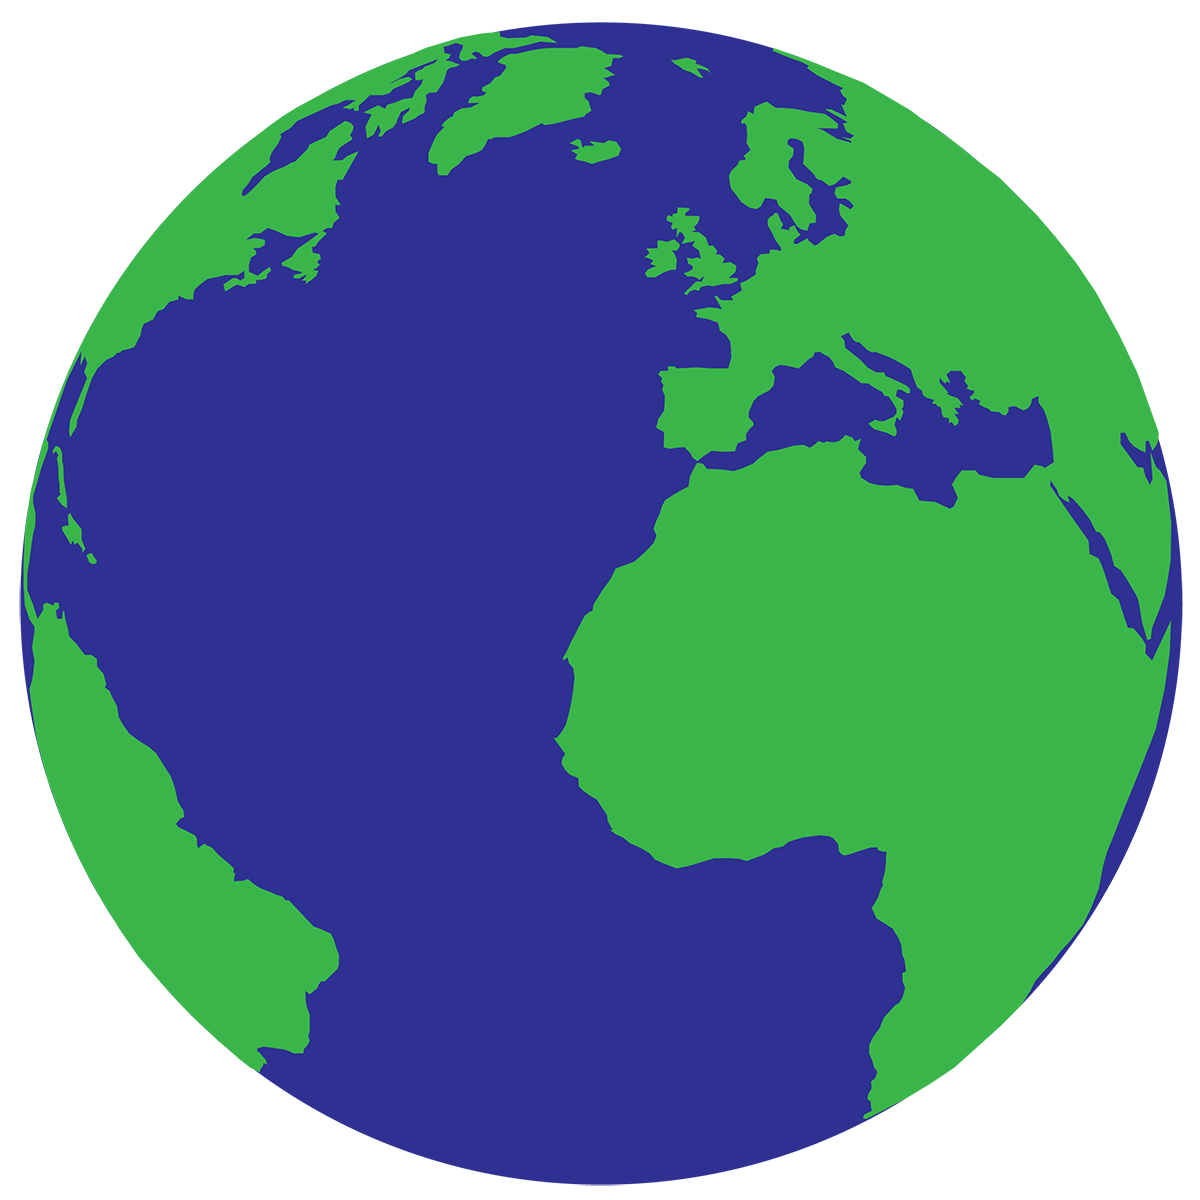 Earth planet drawing at. Clipart globe fancy